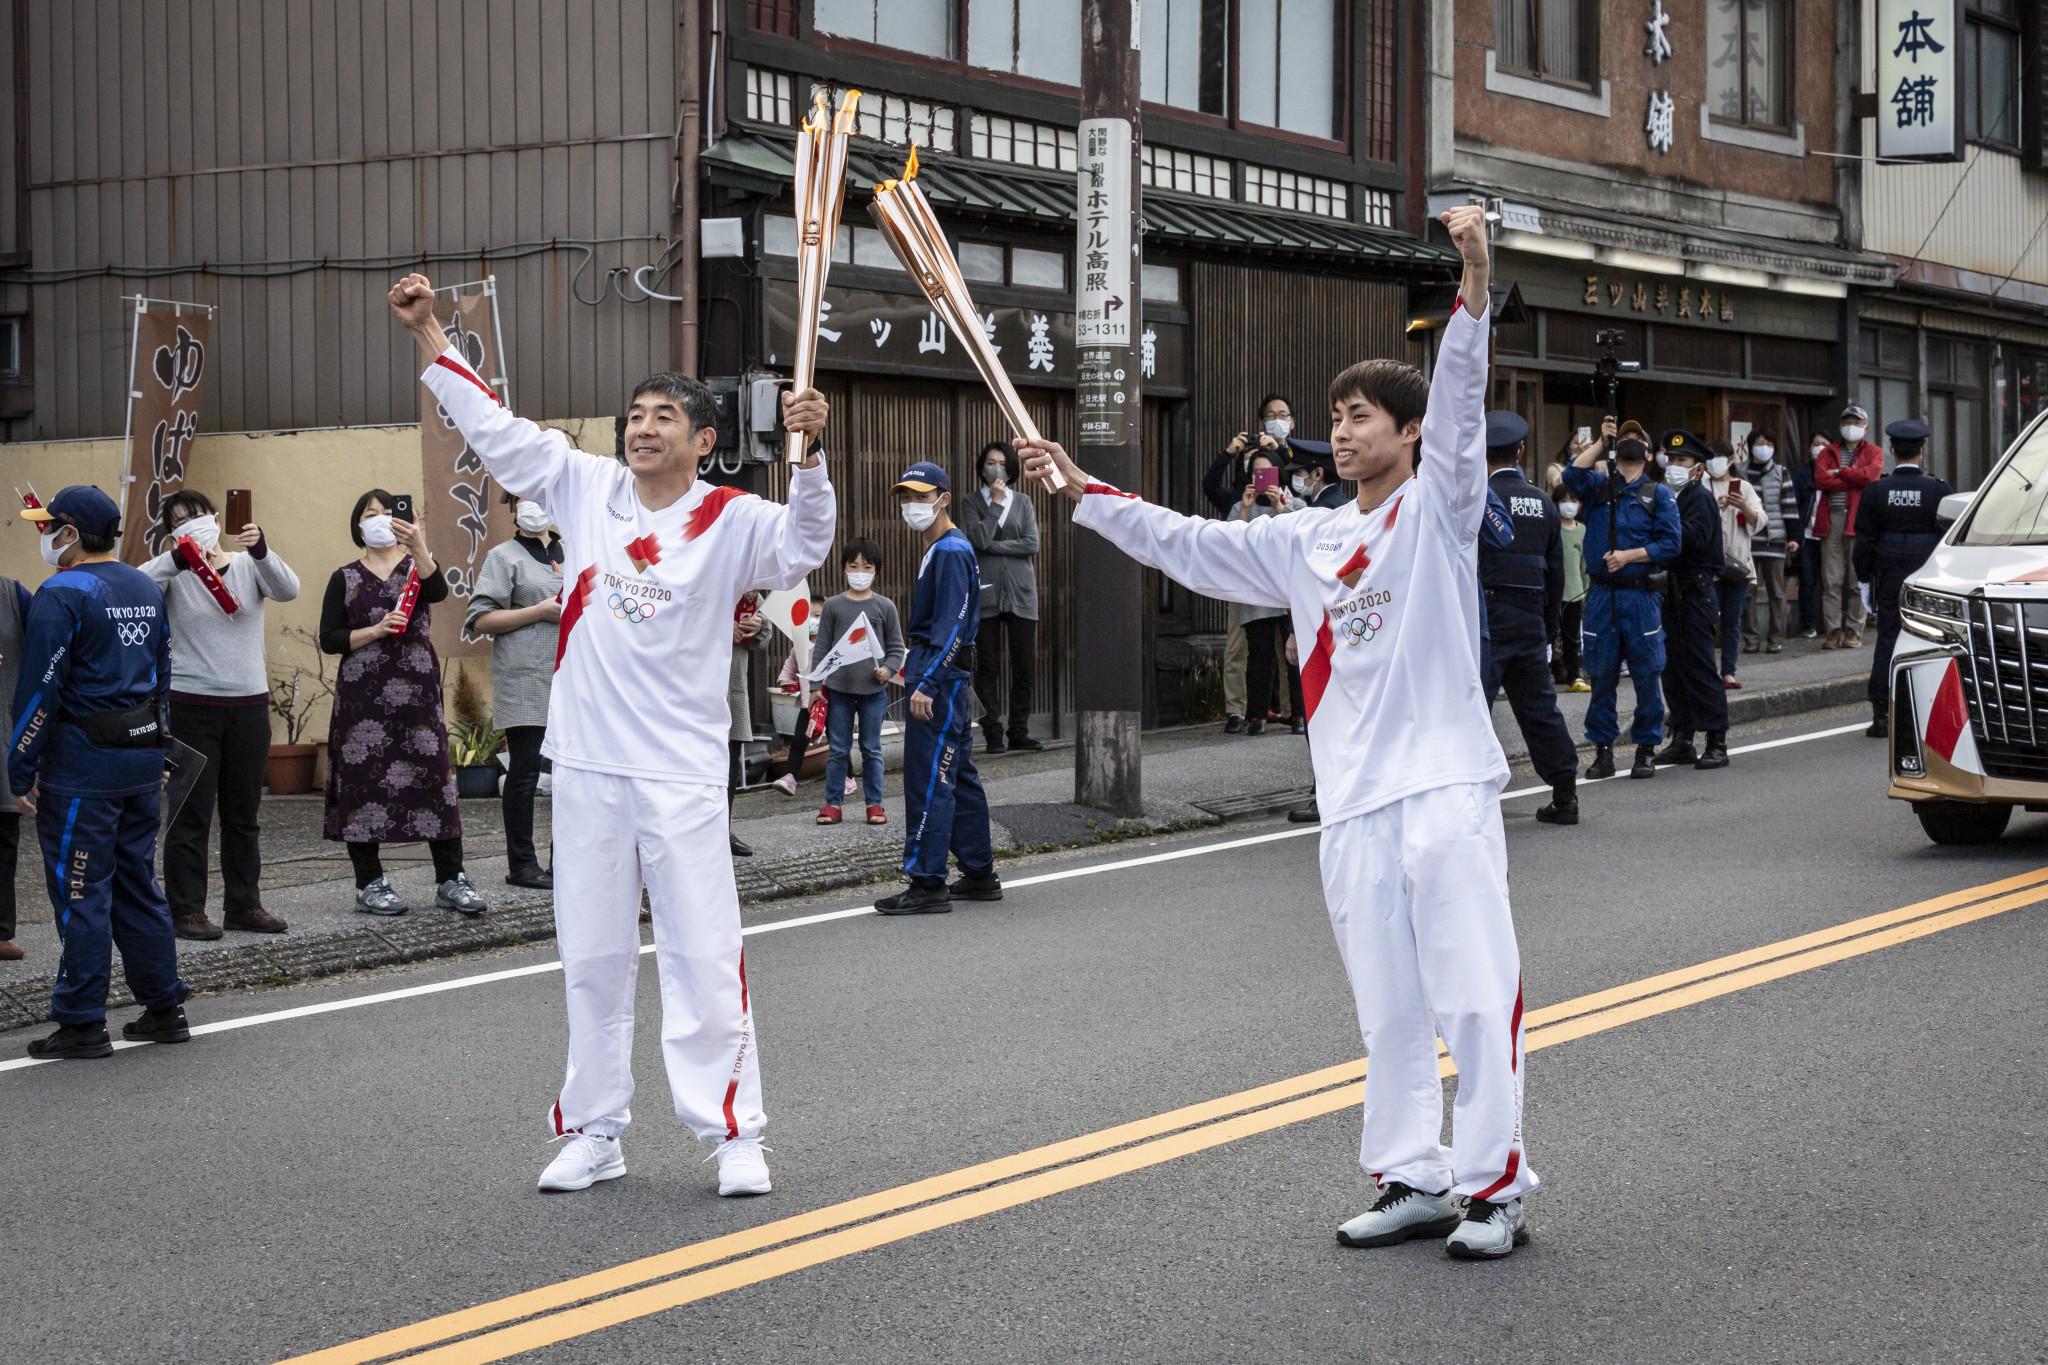 The Olympic Flame restarted its journey in Fukushima on March 25 ©Getty Images